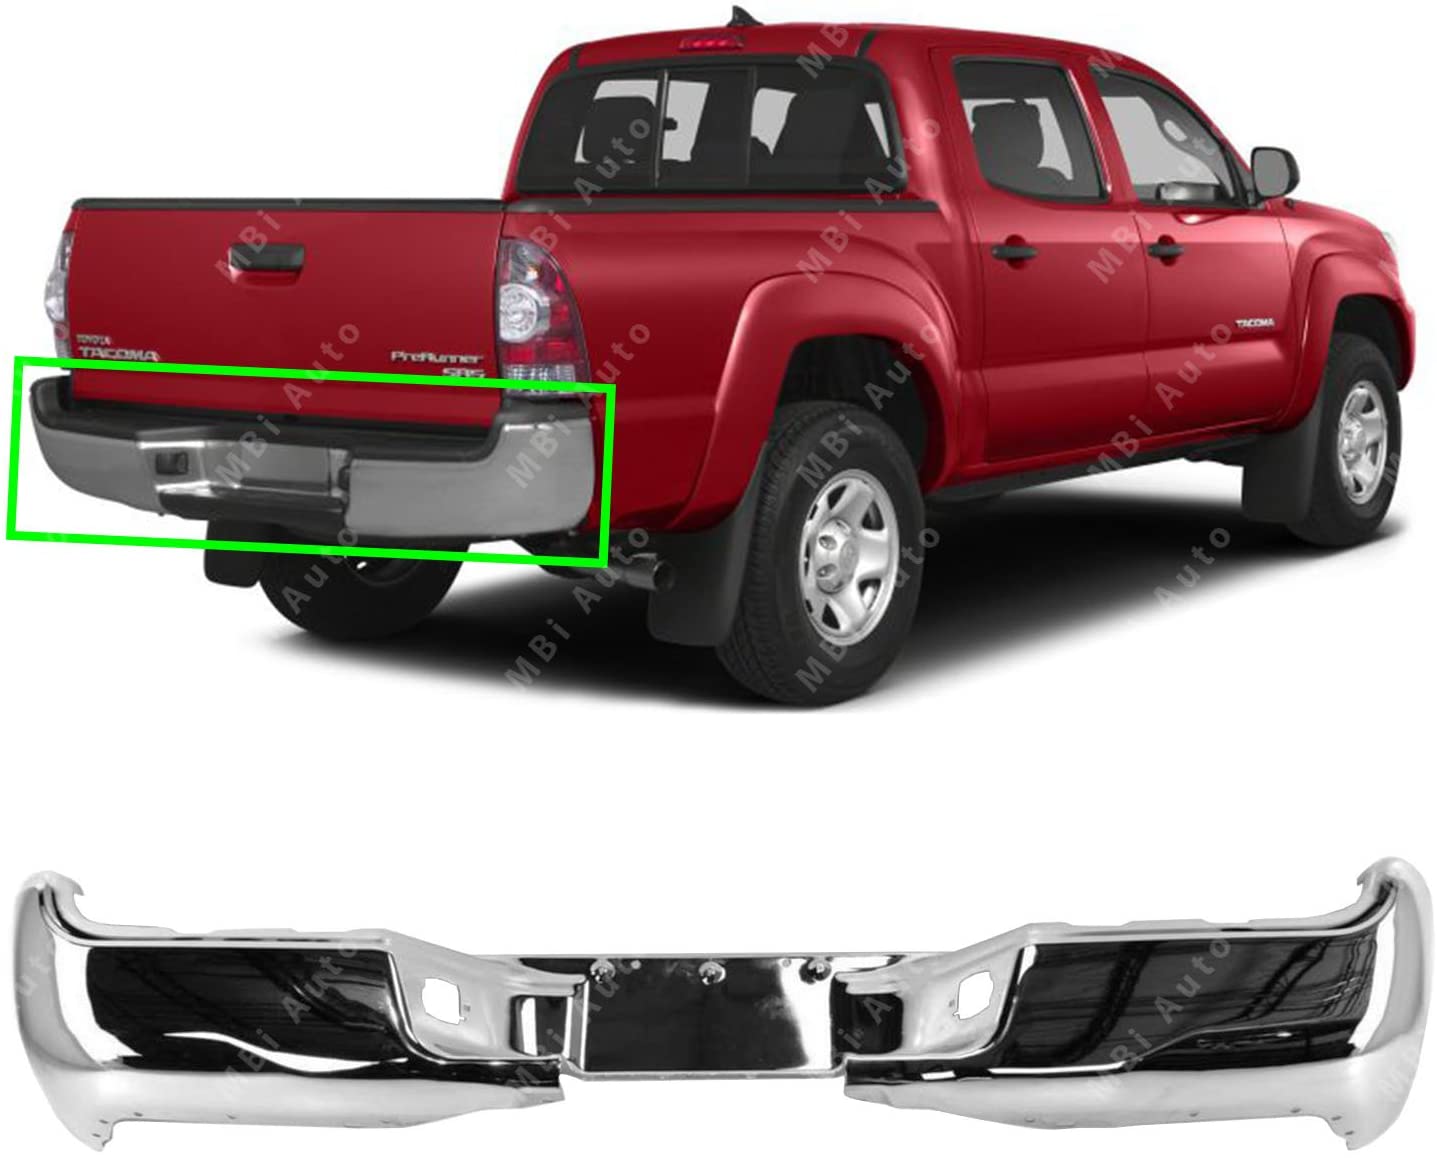 10 Best Bumpers For Toyota Wonderful Engineering